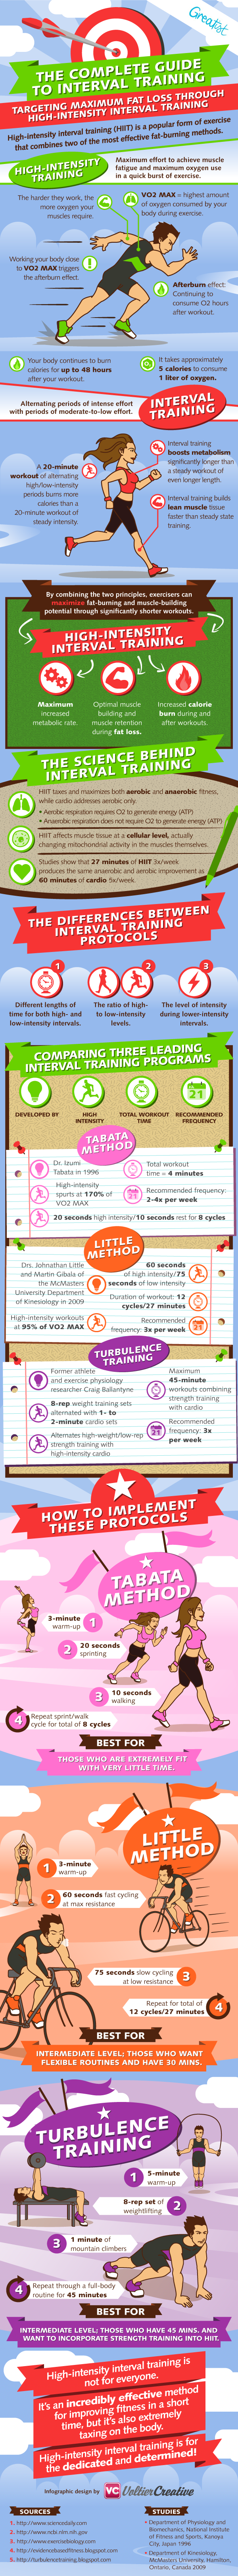 The Complete Guide To High Intensity Interval Training Infographic